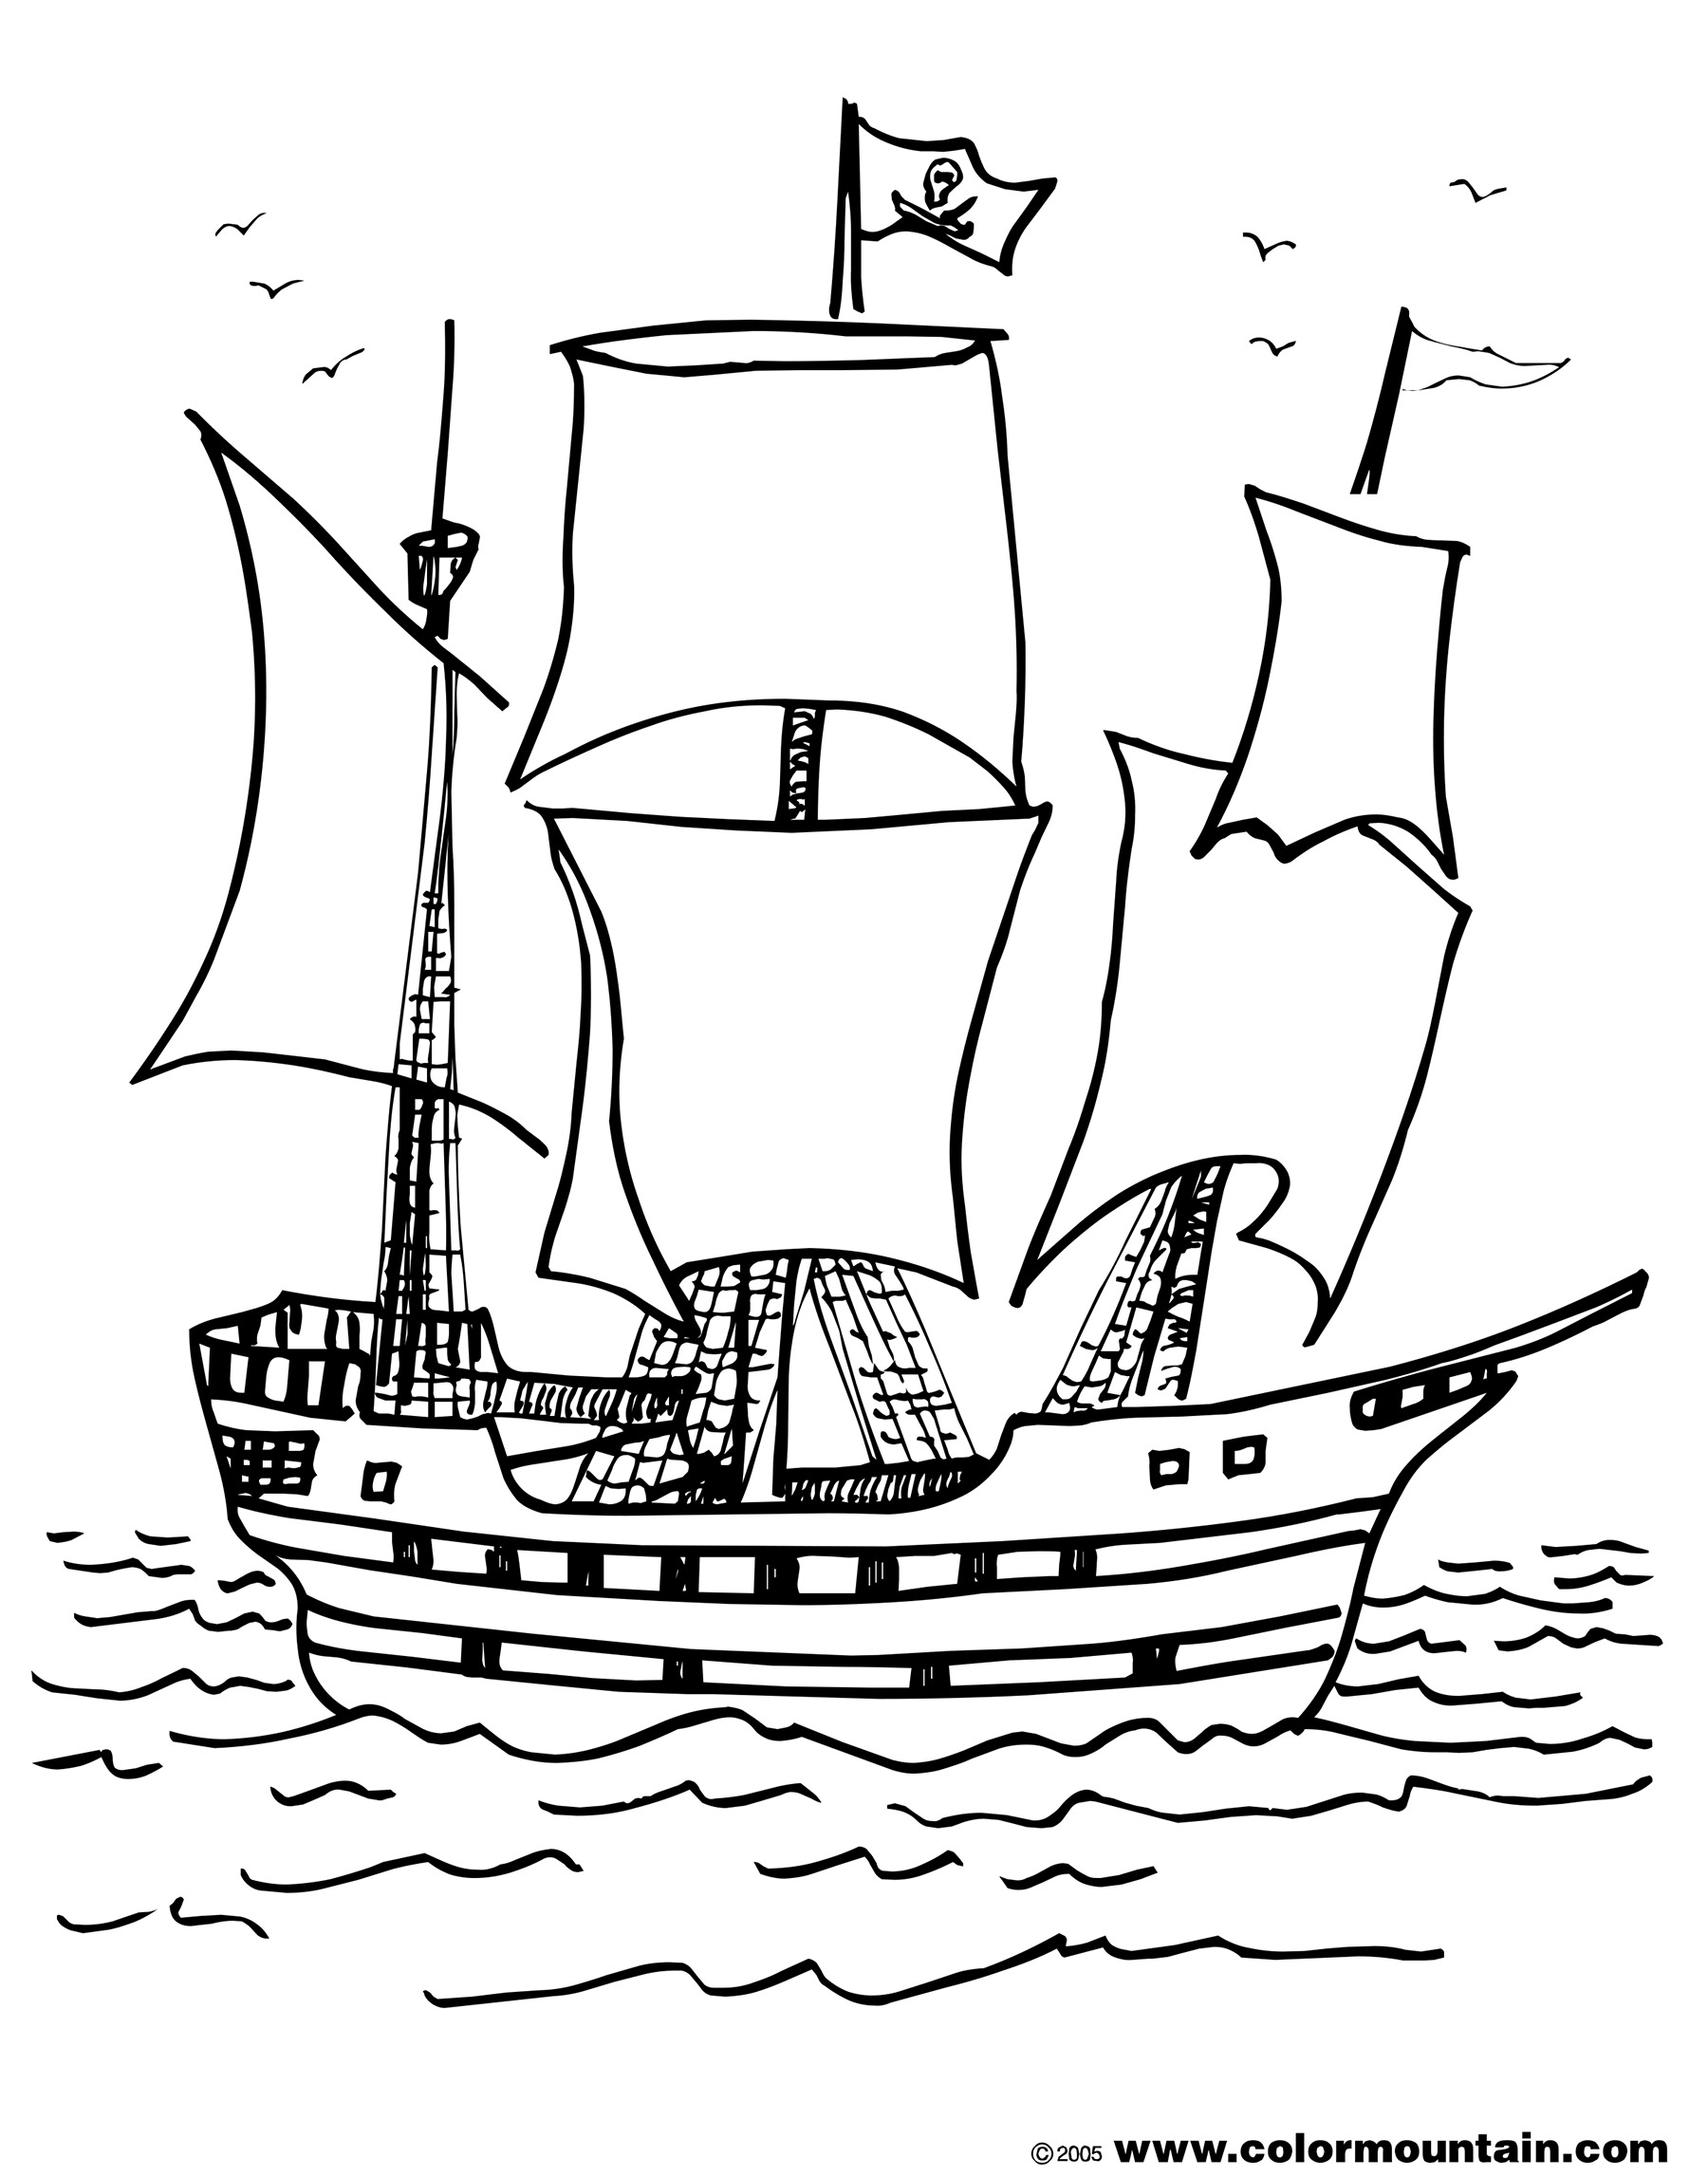 pirate ship to color pirate ship coloring page coloringcom ship color pirate to 